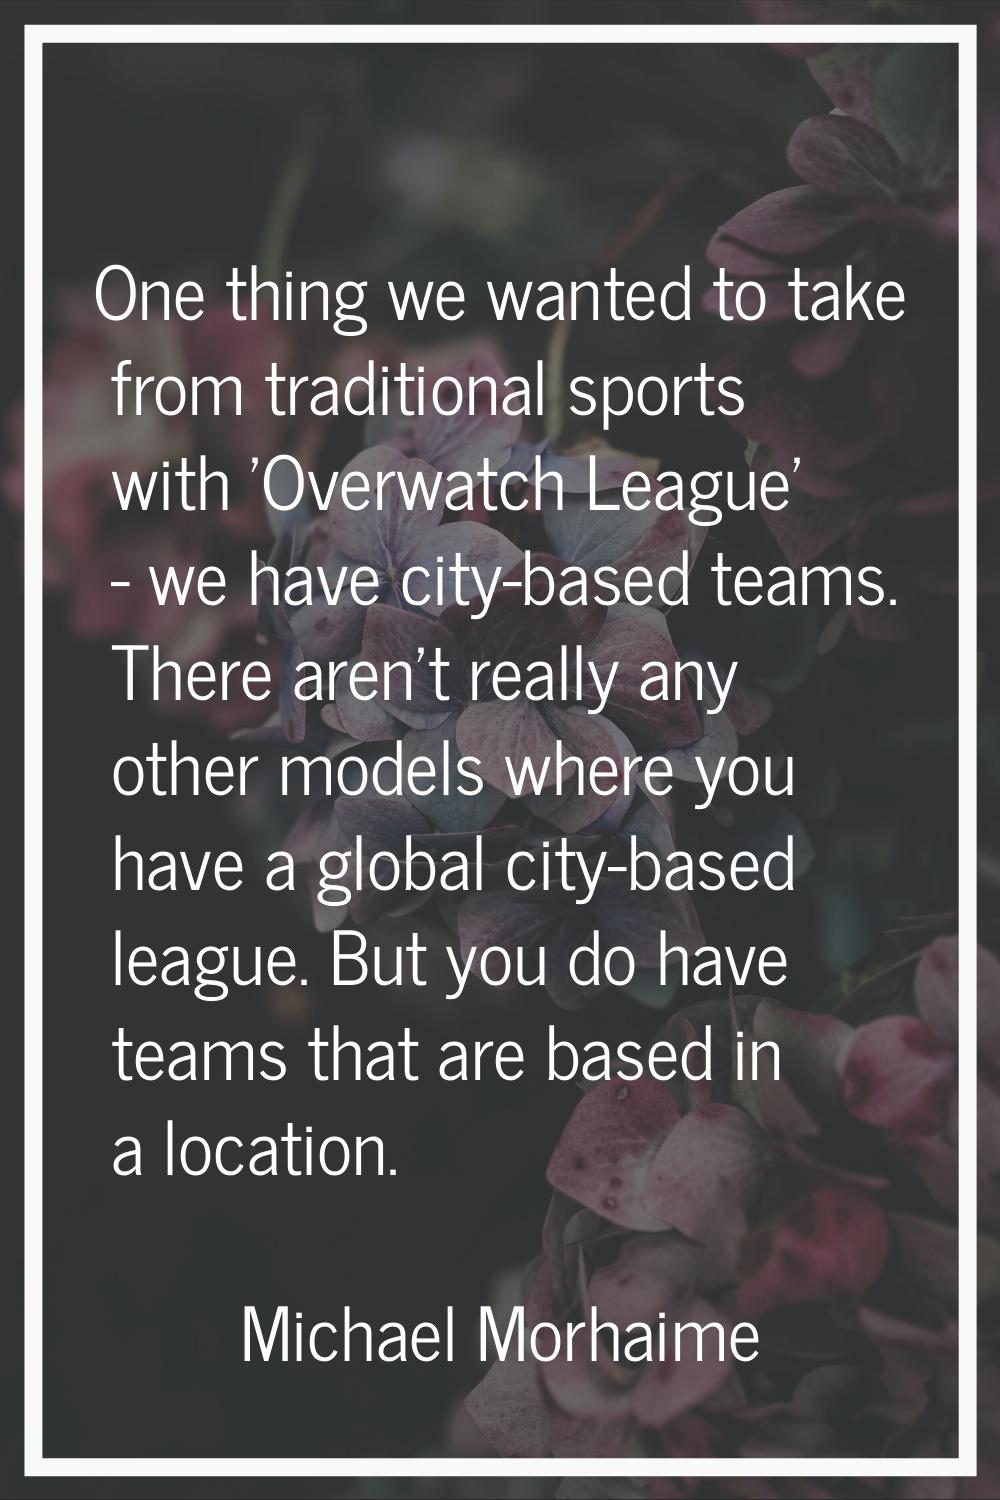 One thing we wanted to take from traditional sports with 'Overwatch League' - we have city-based te